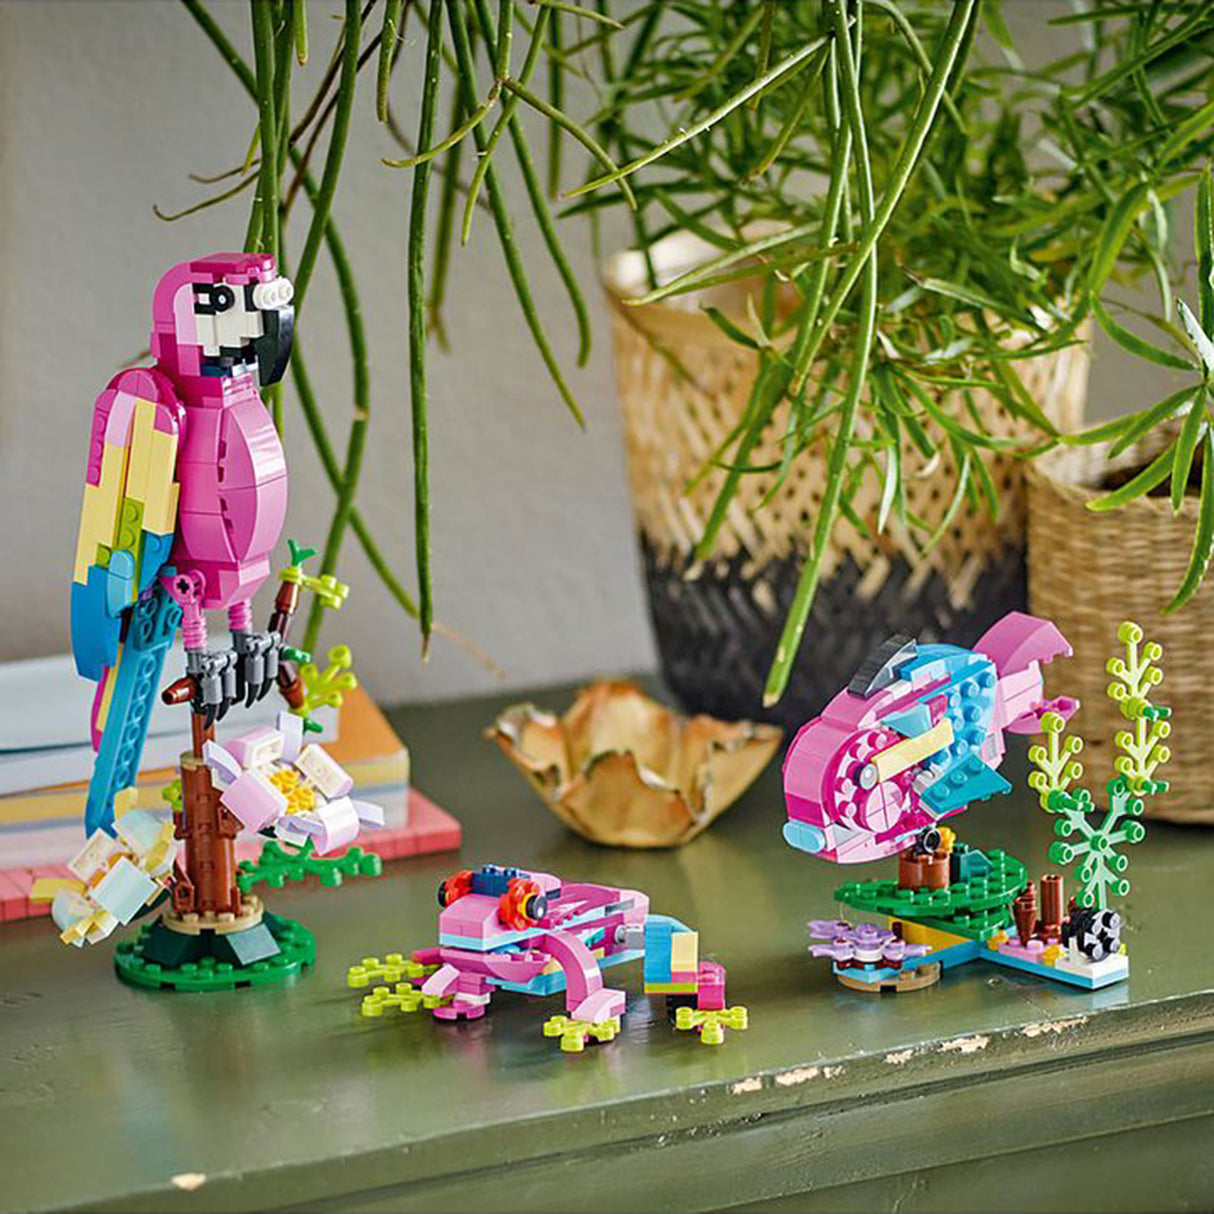 LEGO Creator Exotic Pink Parrot 31144 (253 pieces)